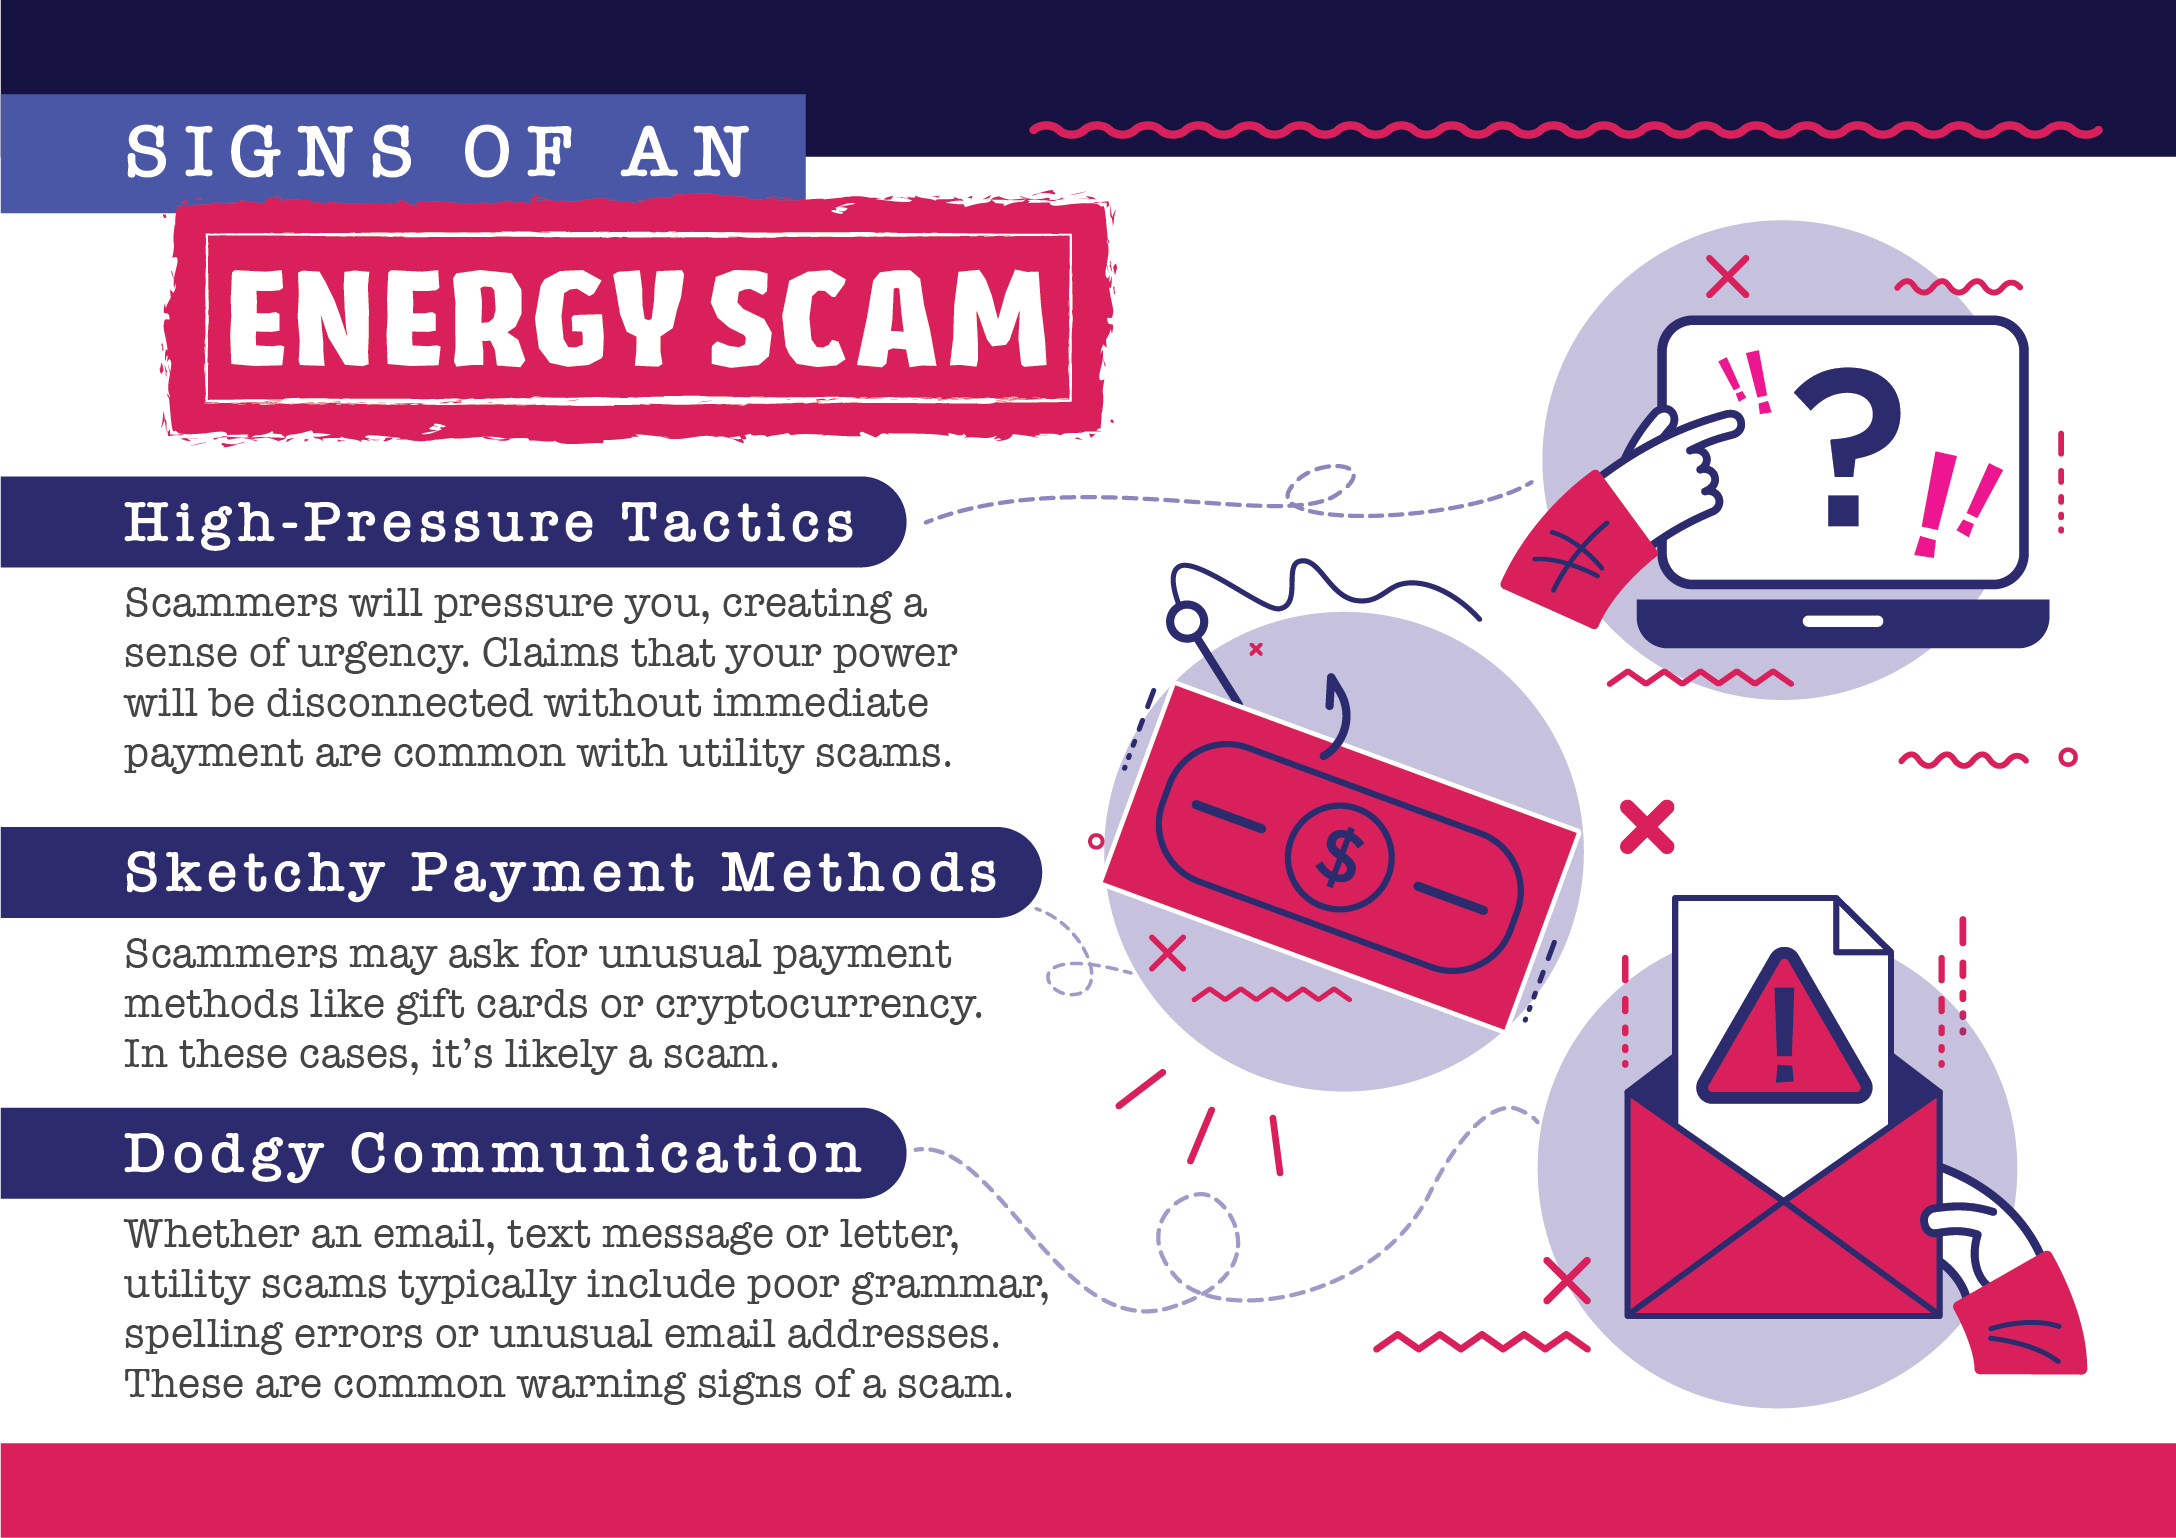 A list of the signs of an energy scam